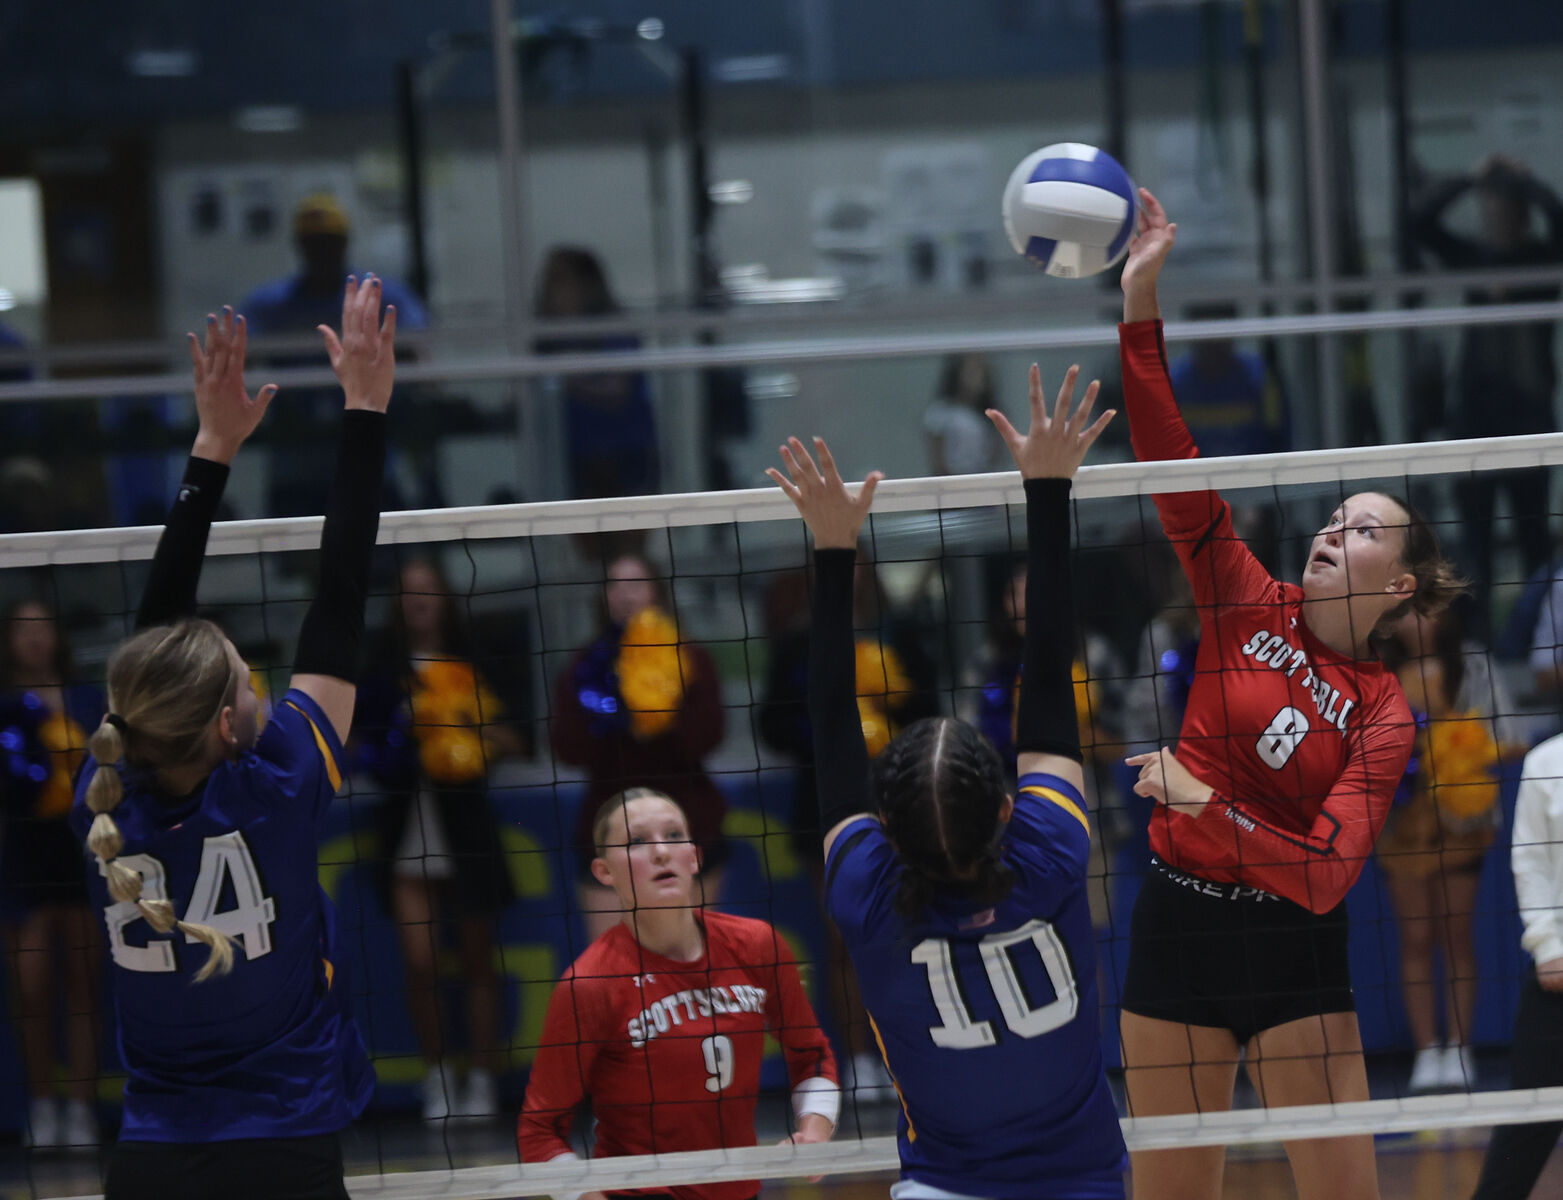 Scottsbluff dominates Gering in high school volleyball match, remains undefeated